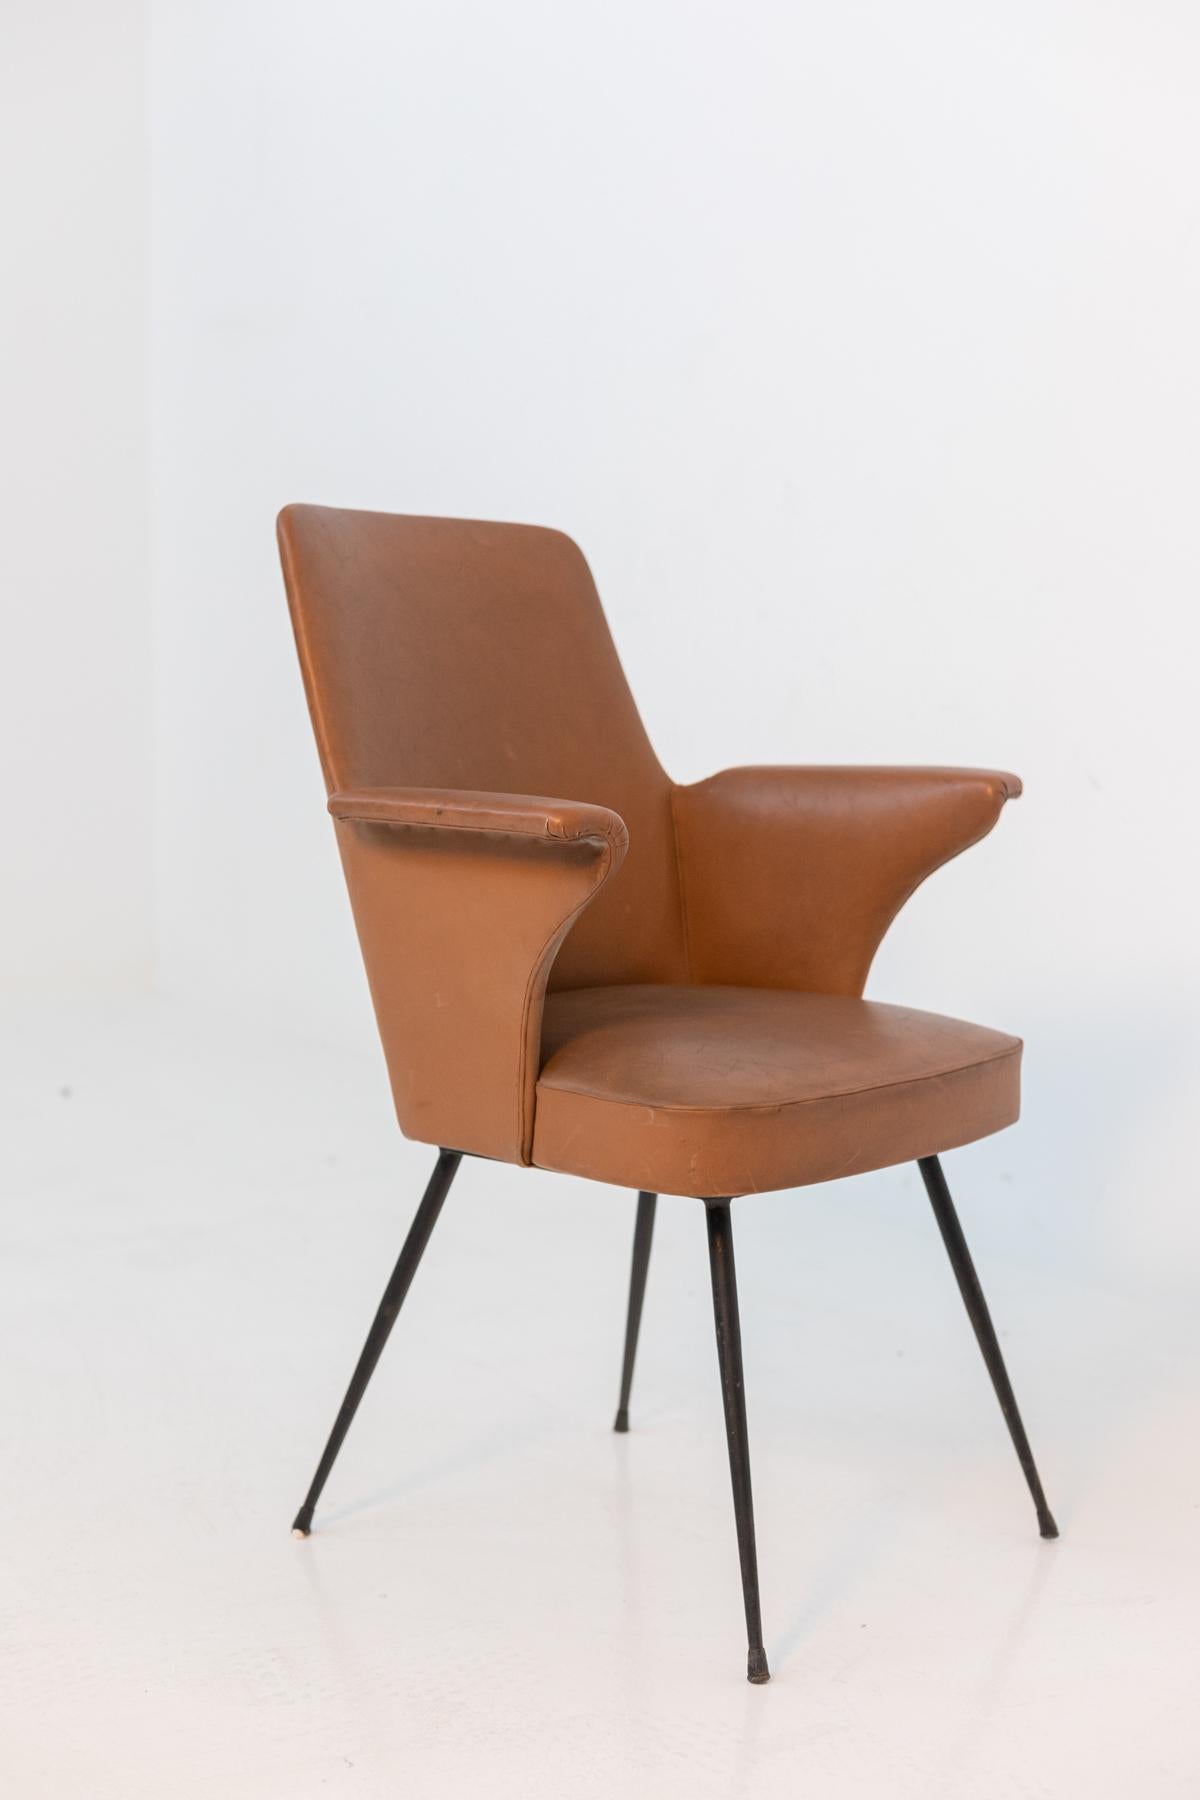 Mid-20th Century Pair of Vintage Chairs in Leather by Nino Zoncada, 1950 For Sale